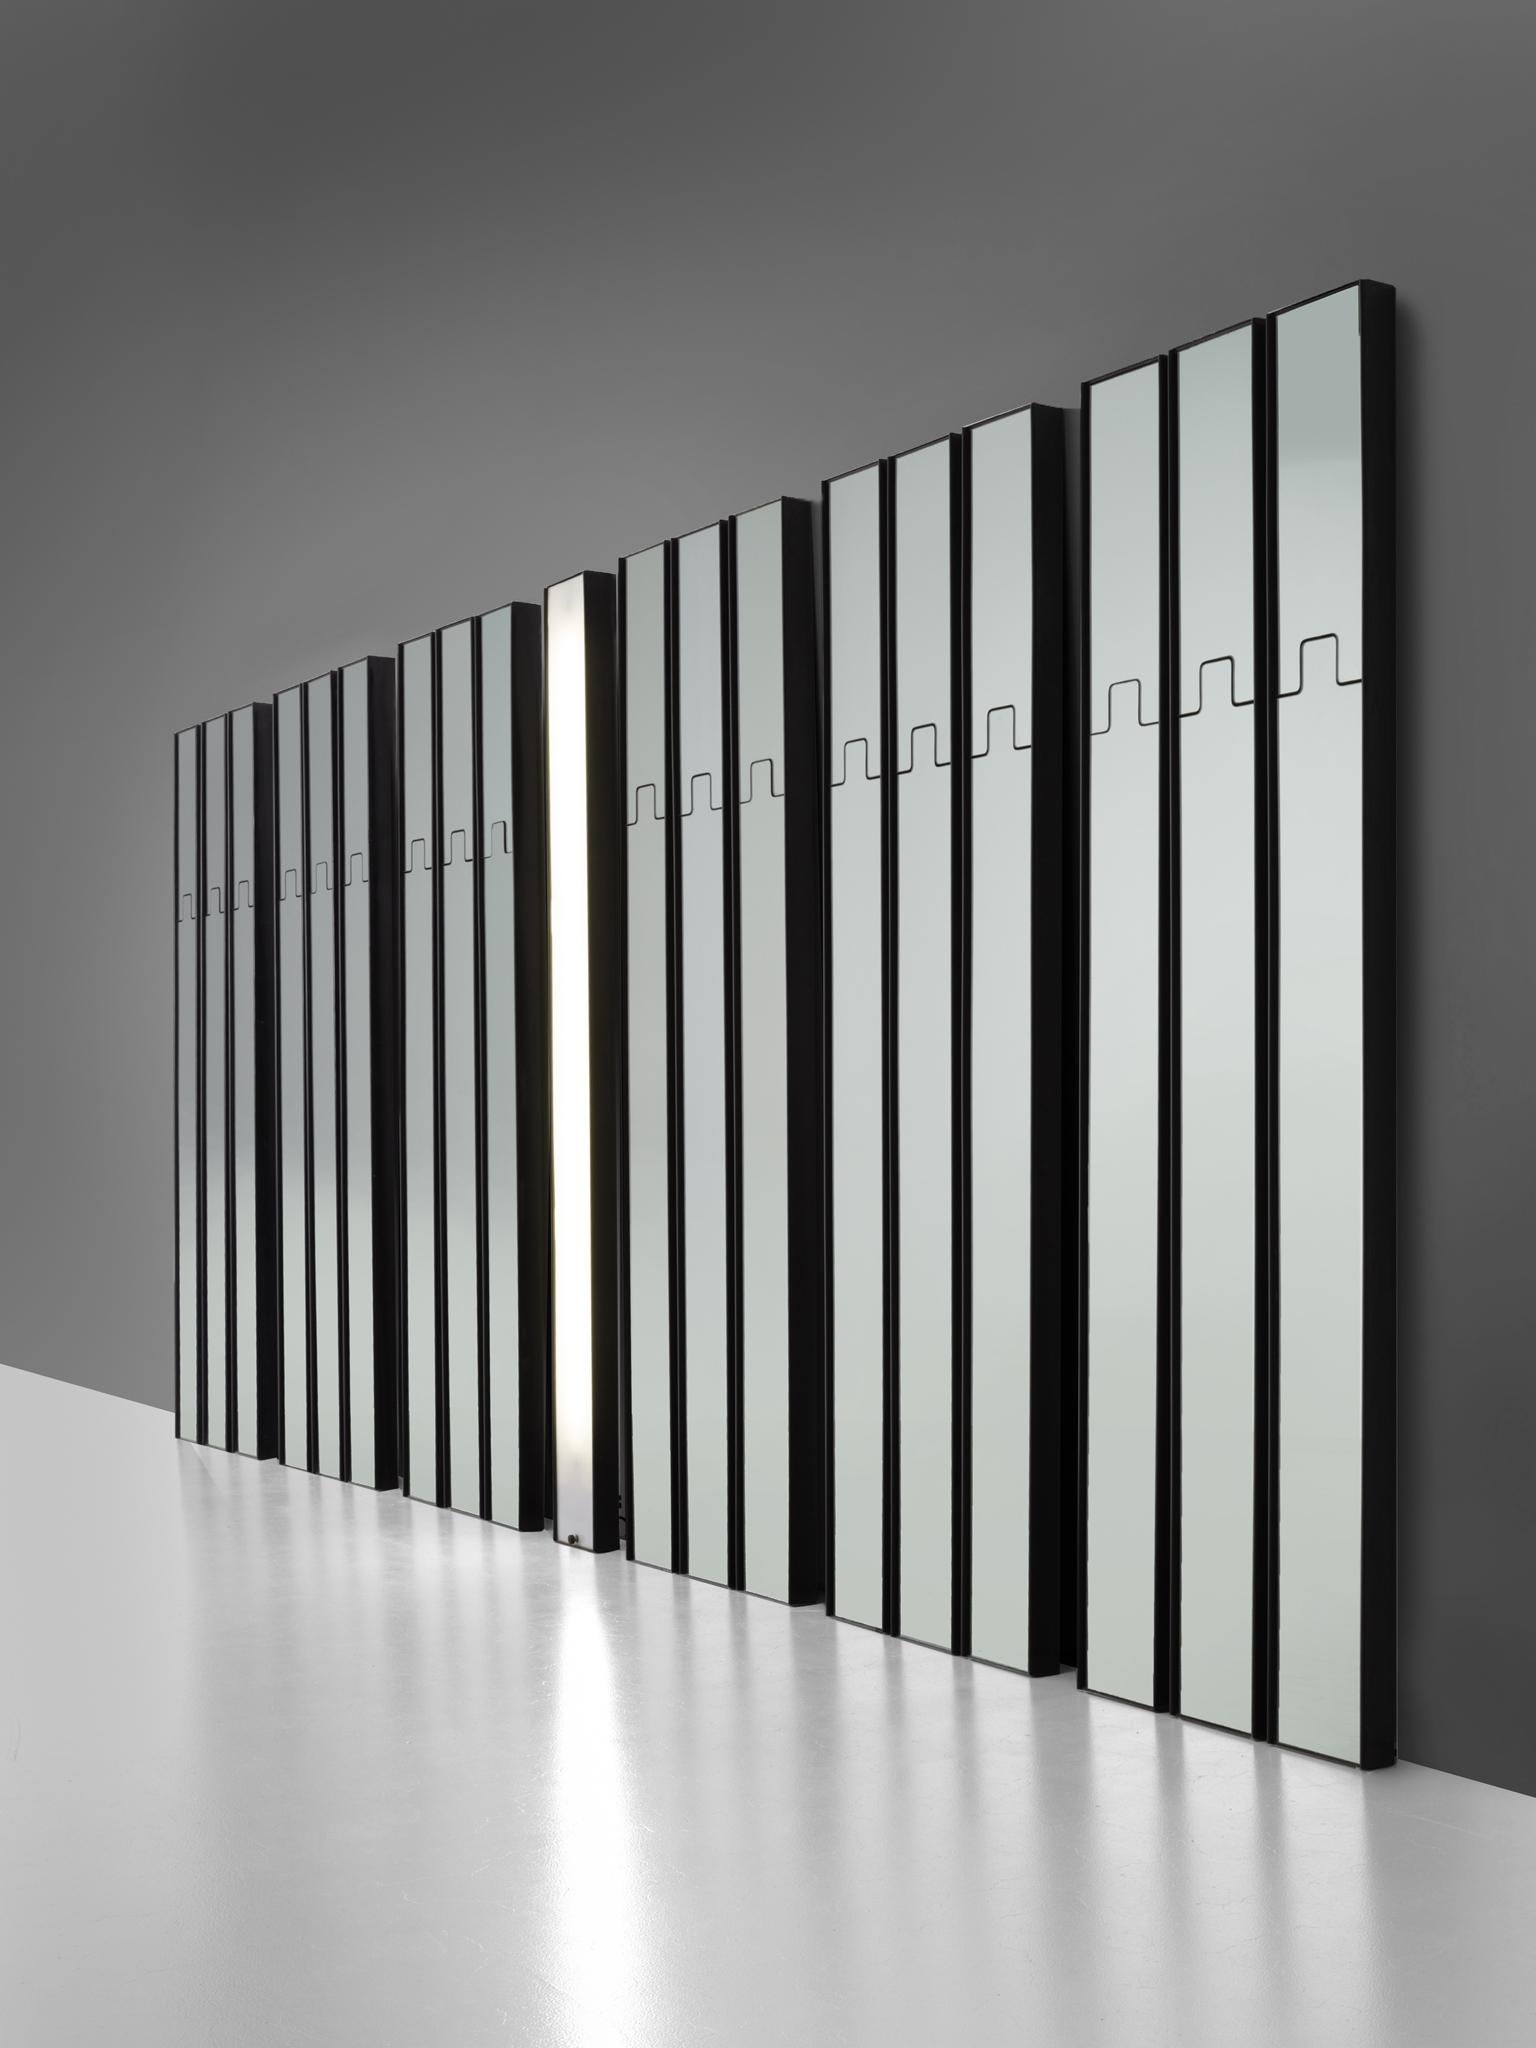 Luciano Bertoncini for Elco, mirror wall elements, black plastic and mirror, Italy, 1970.

This very large collection of wall elements are designed by Luciano Bertoncini. The elements consists of 18 wall-mounted pieces of which 17 mirrors and one